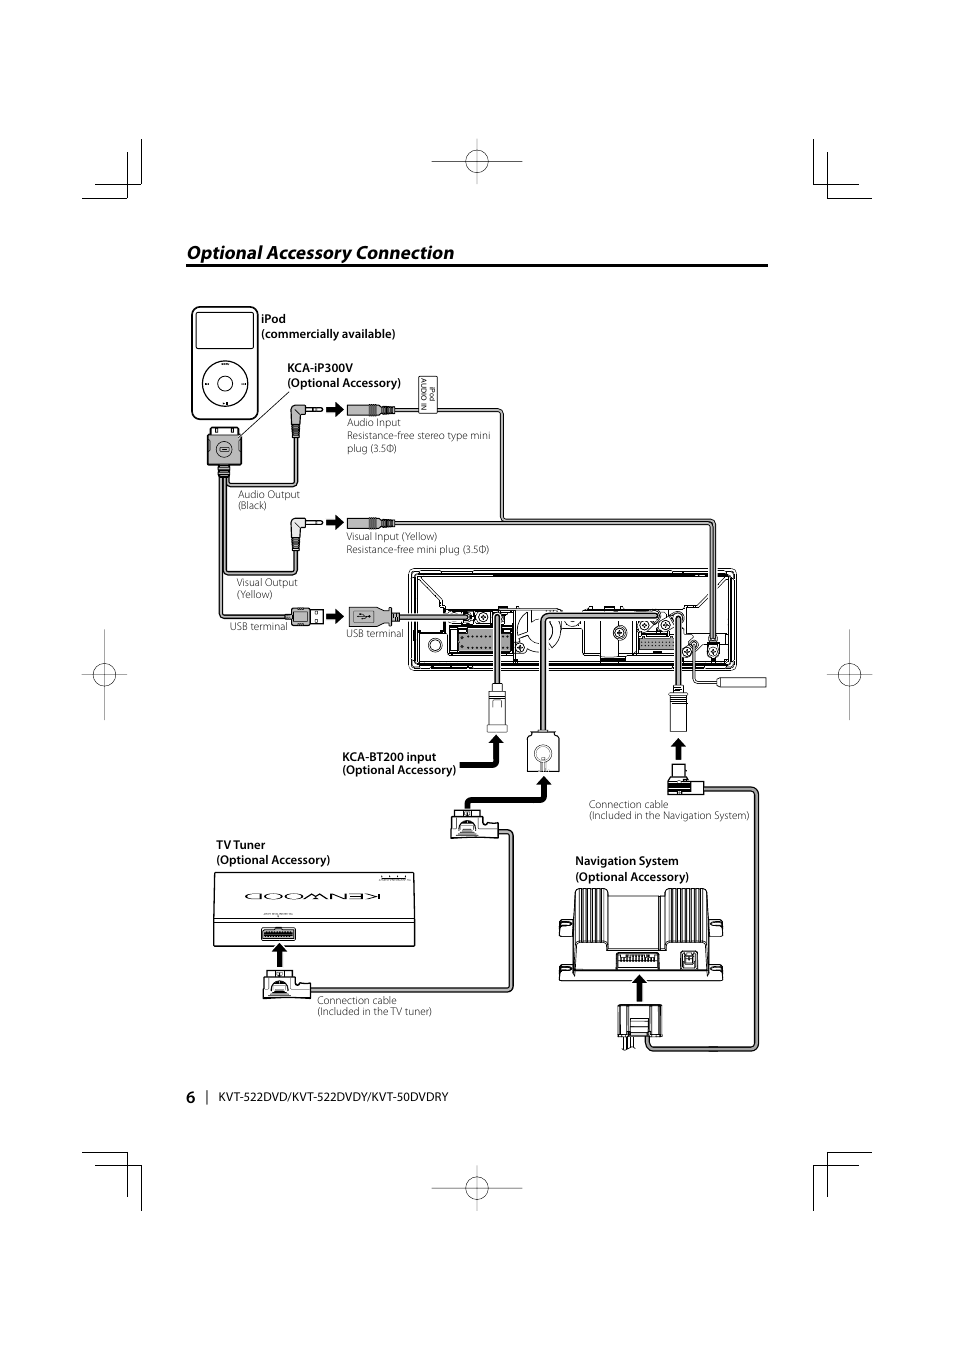 Optional accessory connection | Kenwood KVT-50DVDRY User Manual | Page 6 /  8 | Original mode